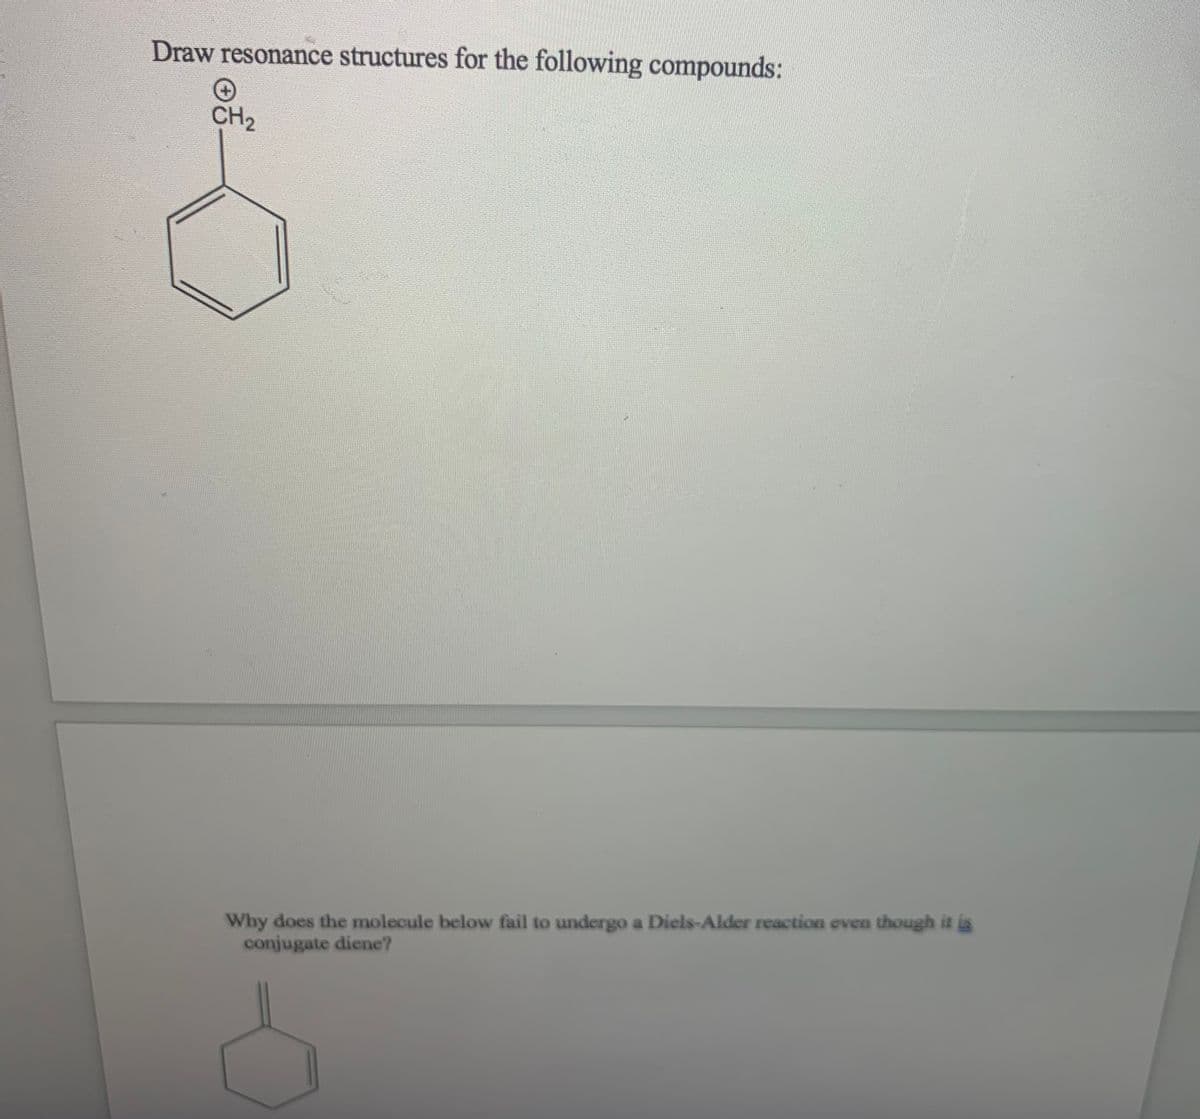 Draw resonance structures for the following compounds:
CH2
Why does the molecule below fail to undergo a Diels-Alder reaction even though it is
conjugate diene?
